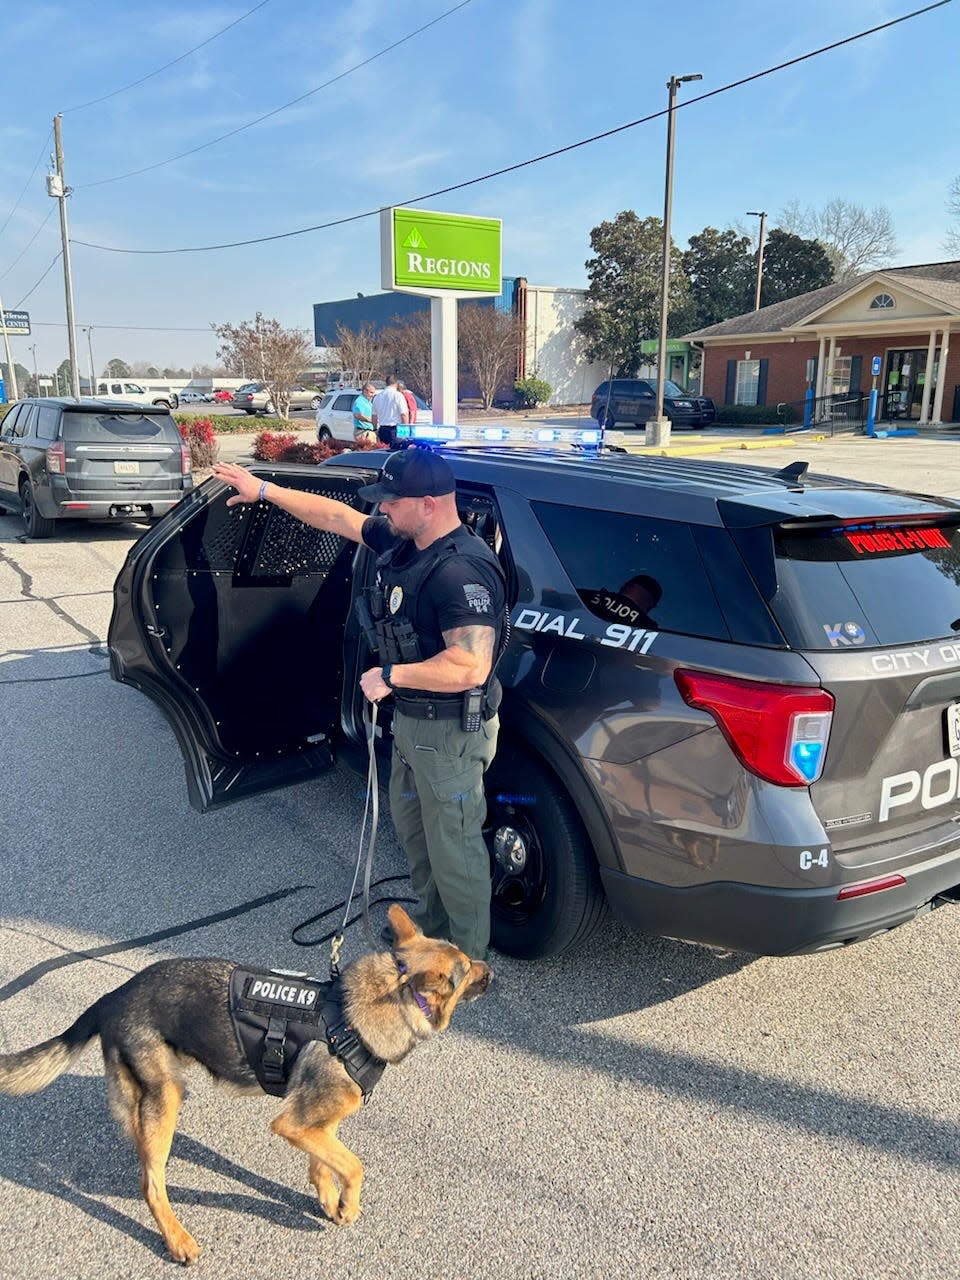 Wrens Police K9 tracking dog Harlowe gets out of a patrol car to begin looking for leads at the Regions Bank shortly after a robbery at that location.